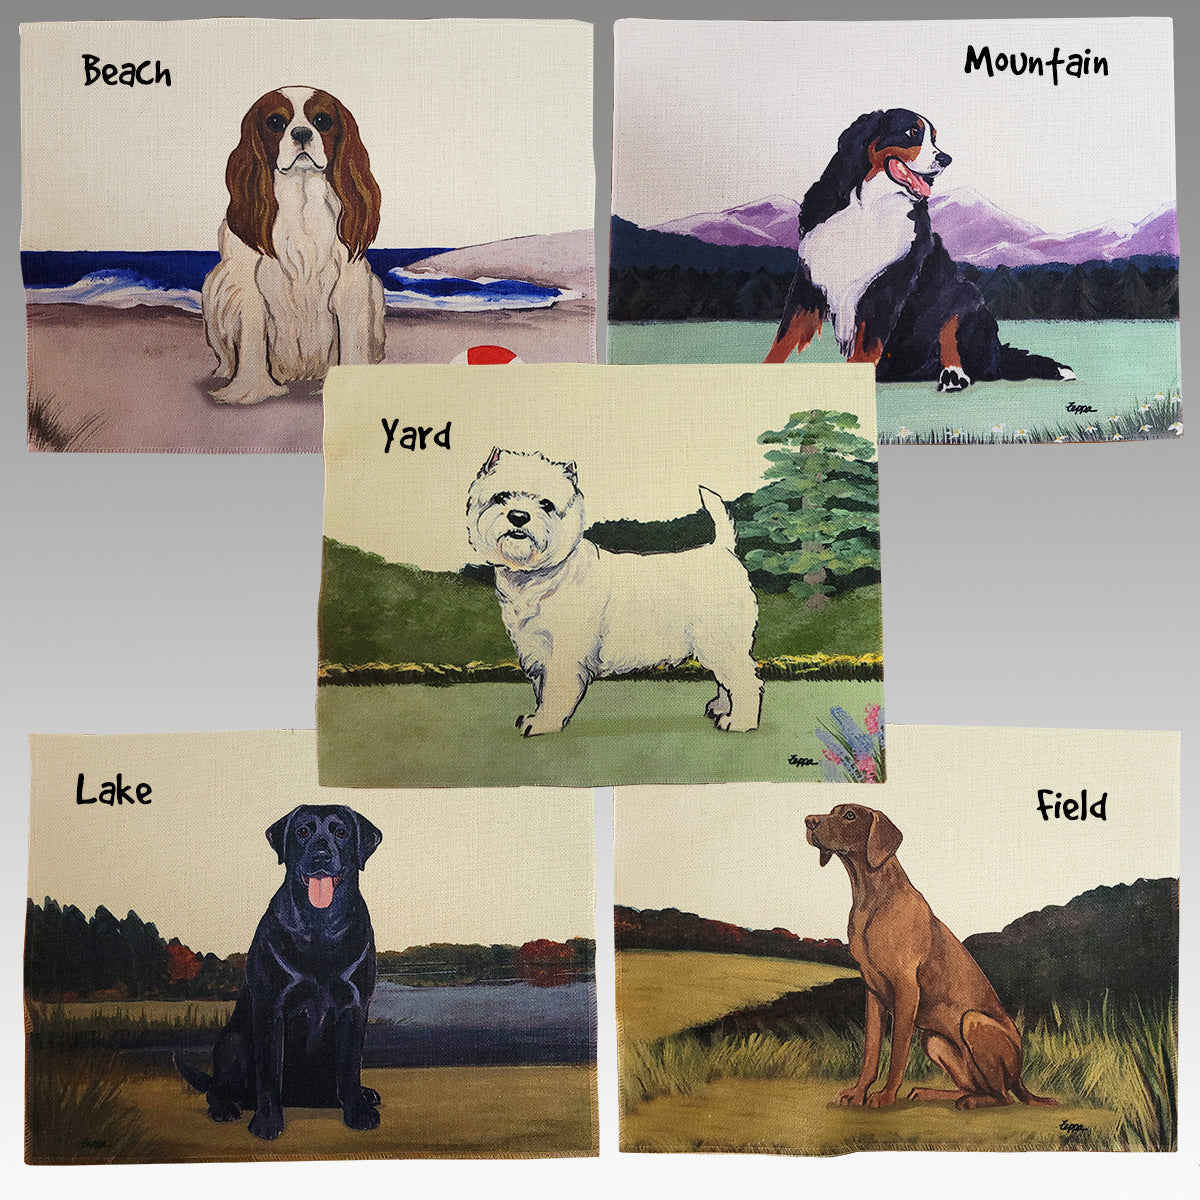 Greyhound Scenic Placemats